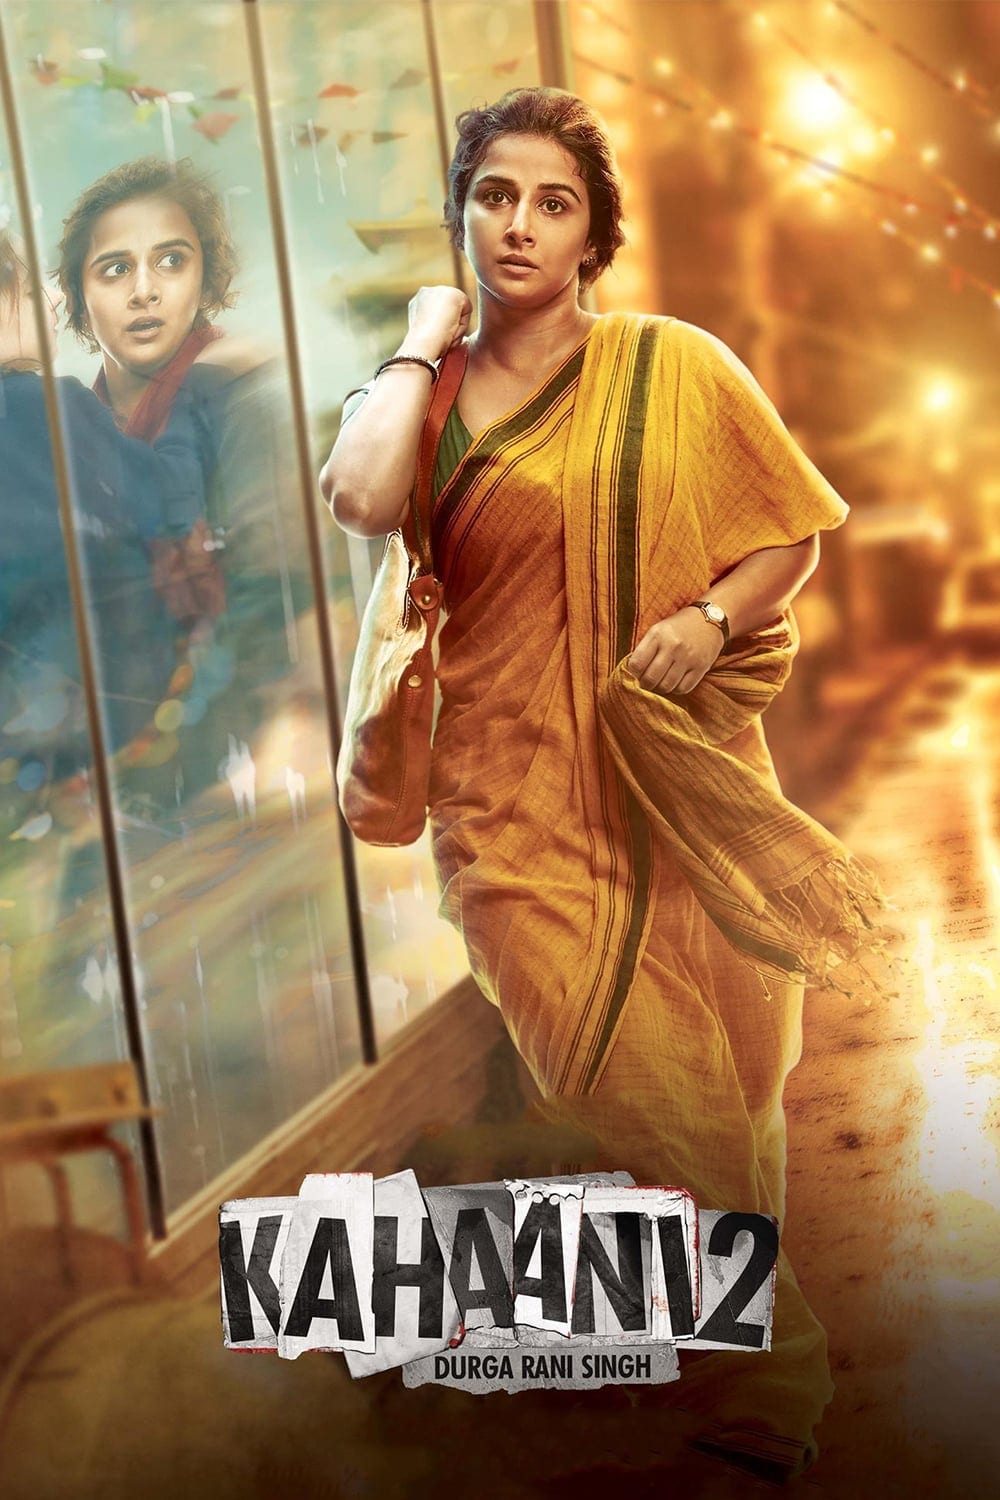 Poster for the movie "Kahaani 2"